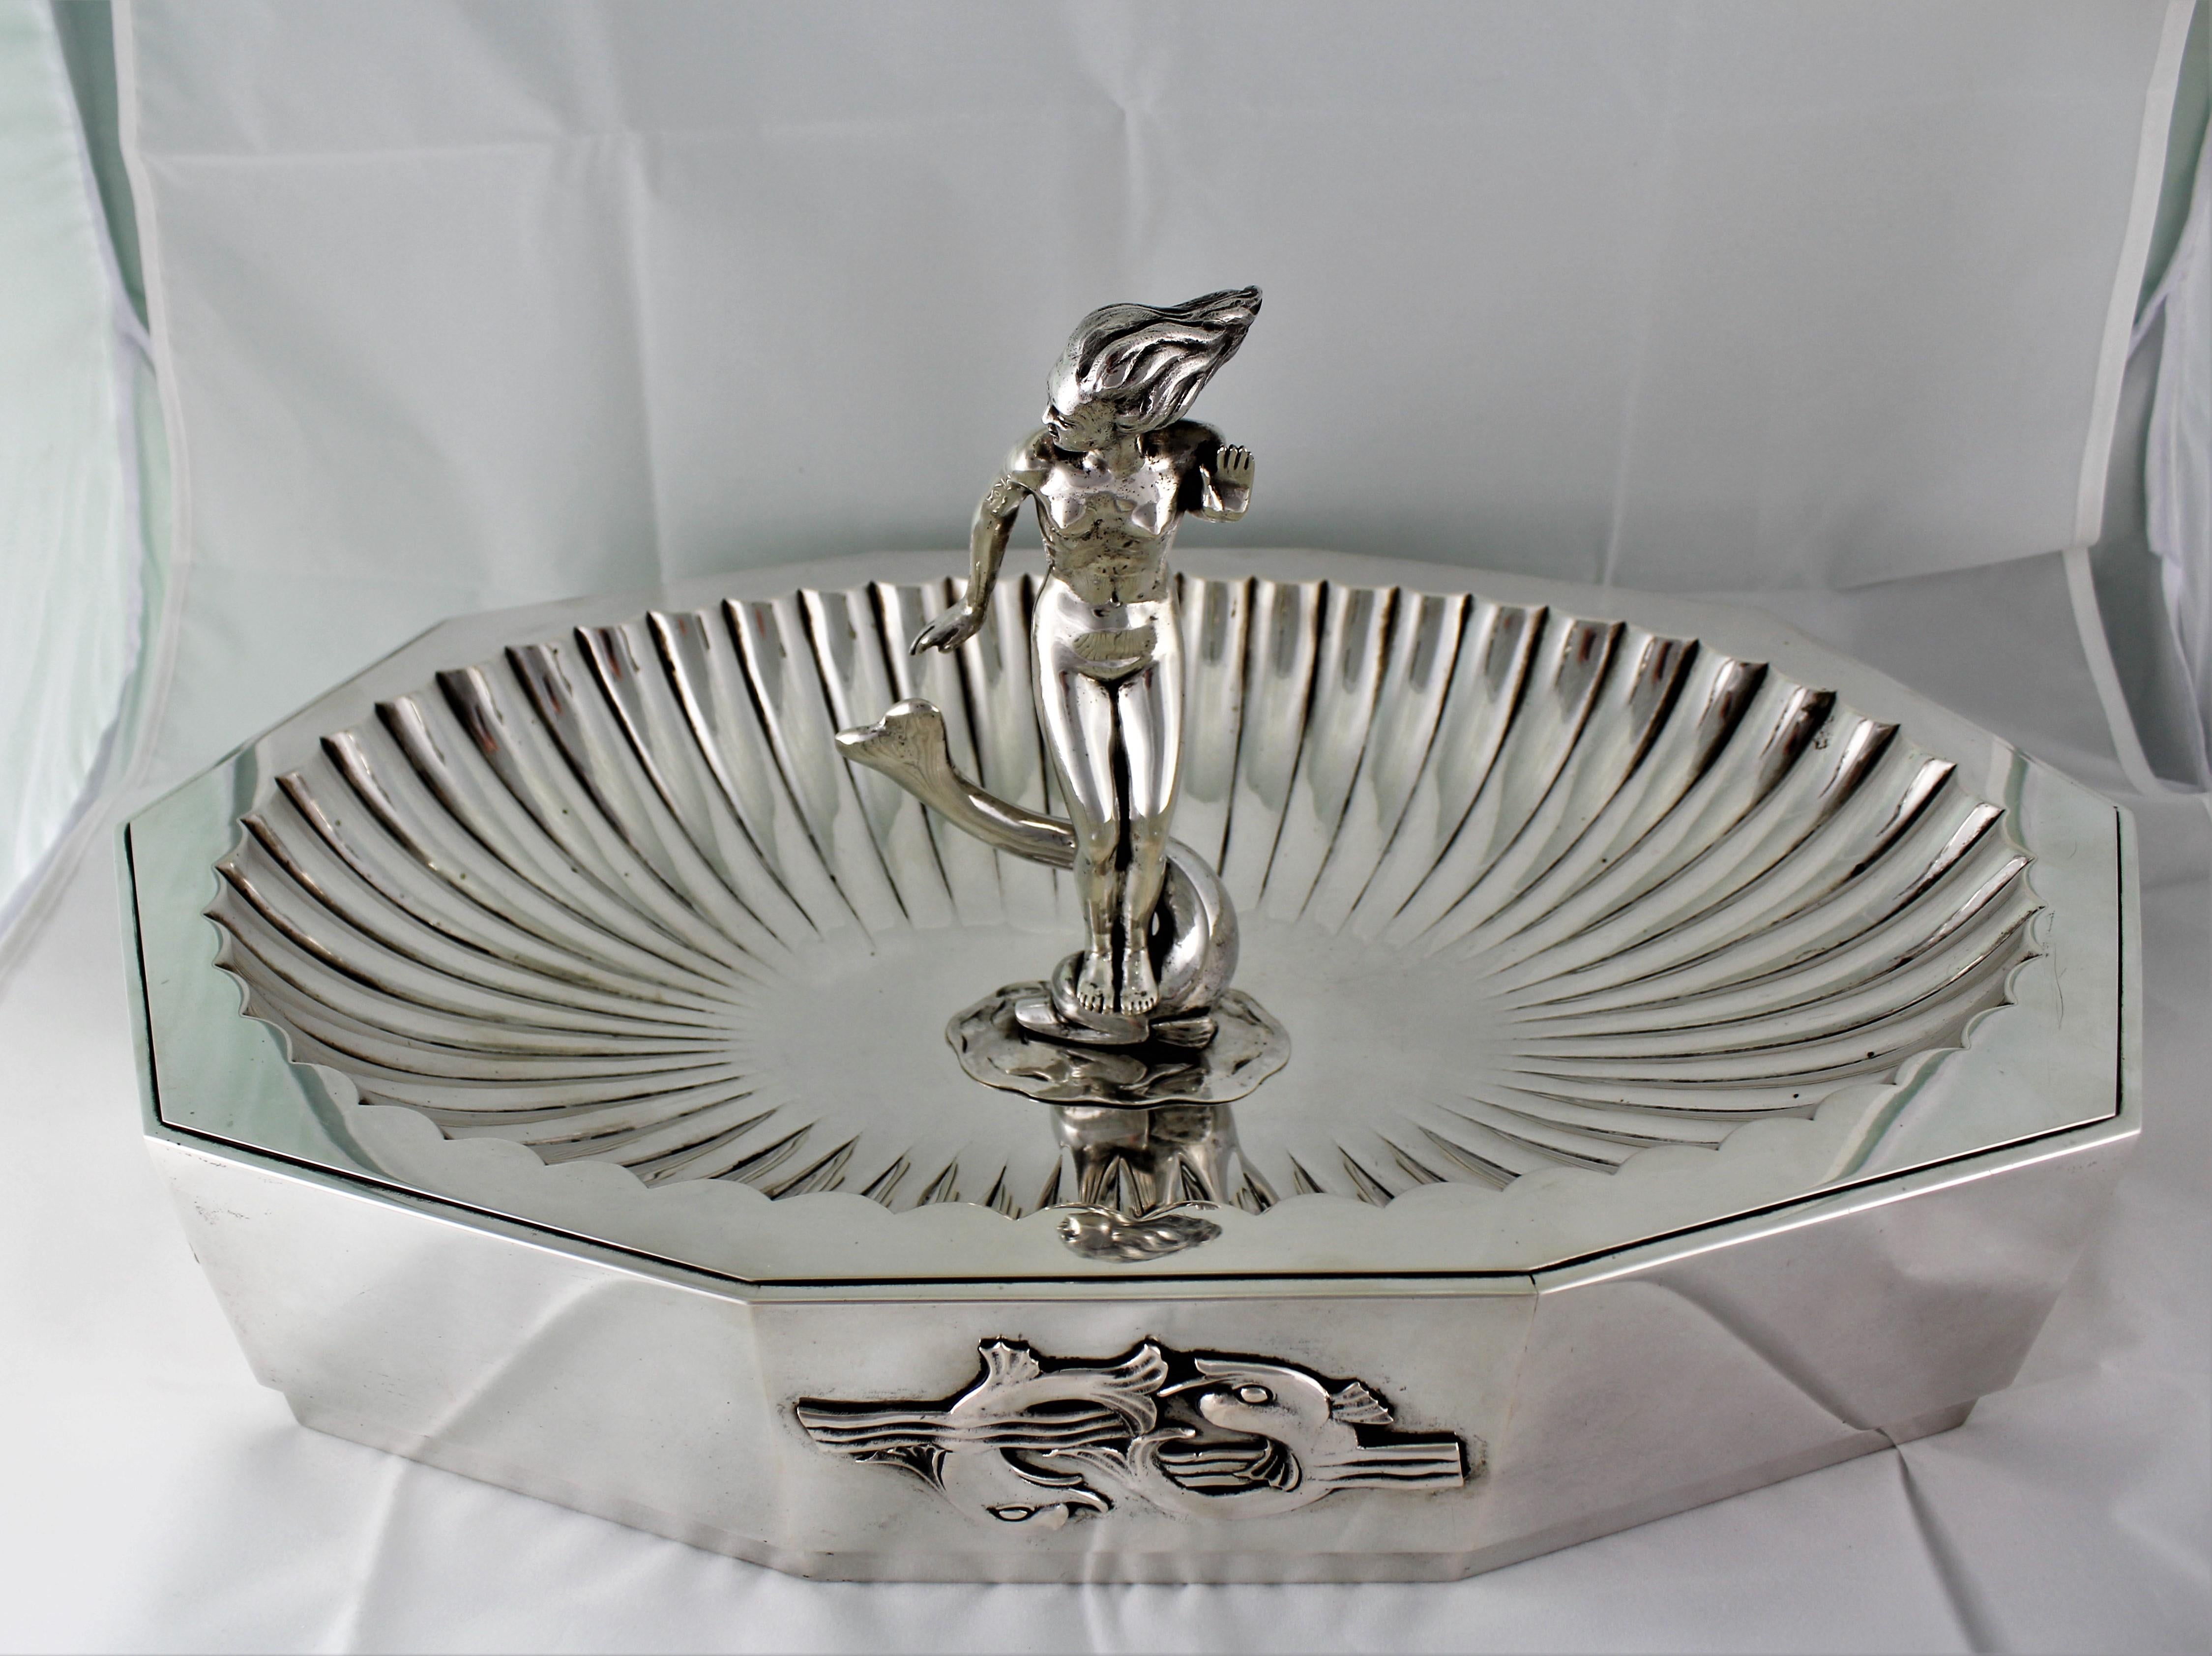 Exceptional handcrafted Art Deco silver centrepiece by the master Italian silversmith Arrigo Finzi.

Designed to honour a friend who died in WWI. That friend was Antonio Sant'Elia, a renowned futuristic architect from Milan.
The friendship